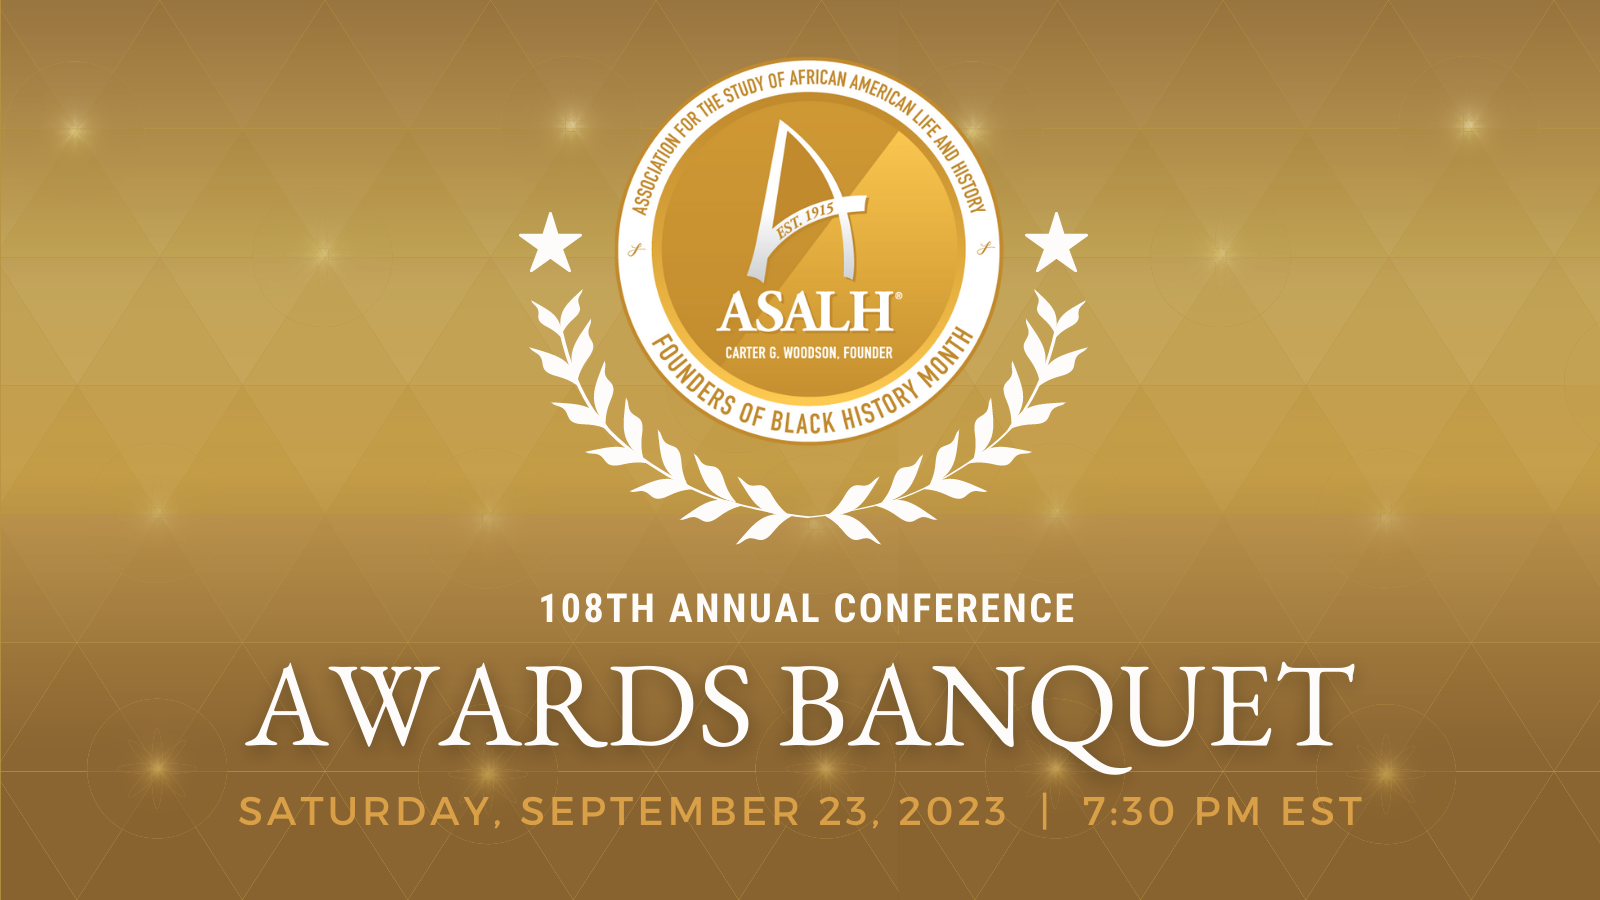 108th Annual Conference Awards Banquet. Saturday, September 23, 2023 at 7:30 pm EST